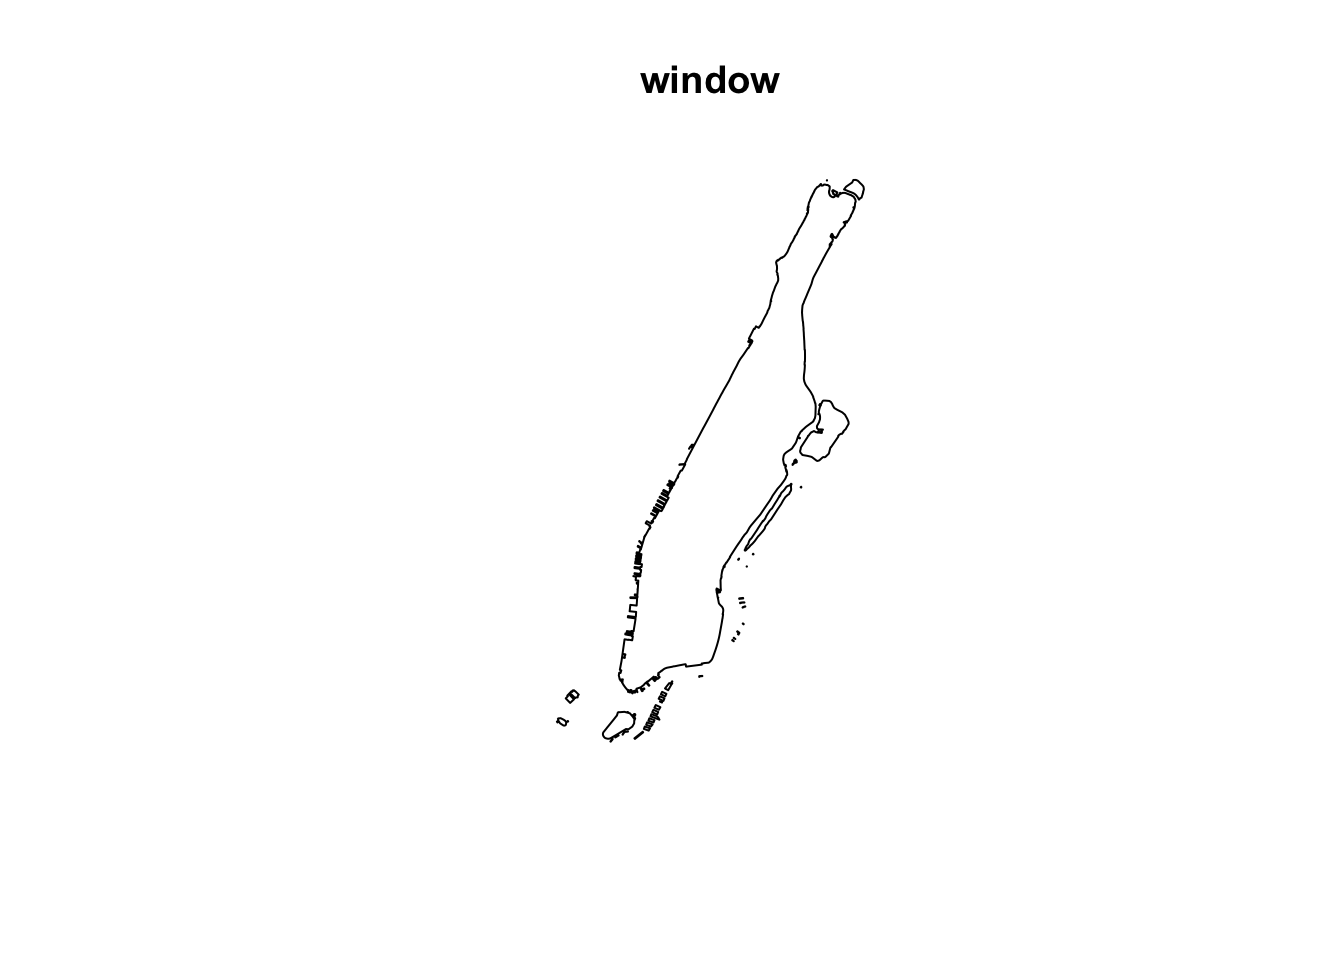 A black outline of the landmasses of Manhattan, with the title 'window' above.